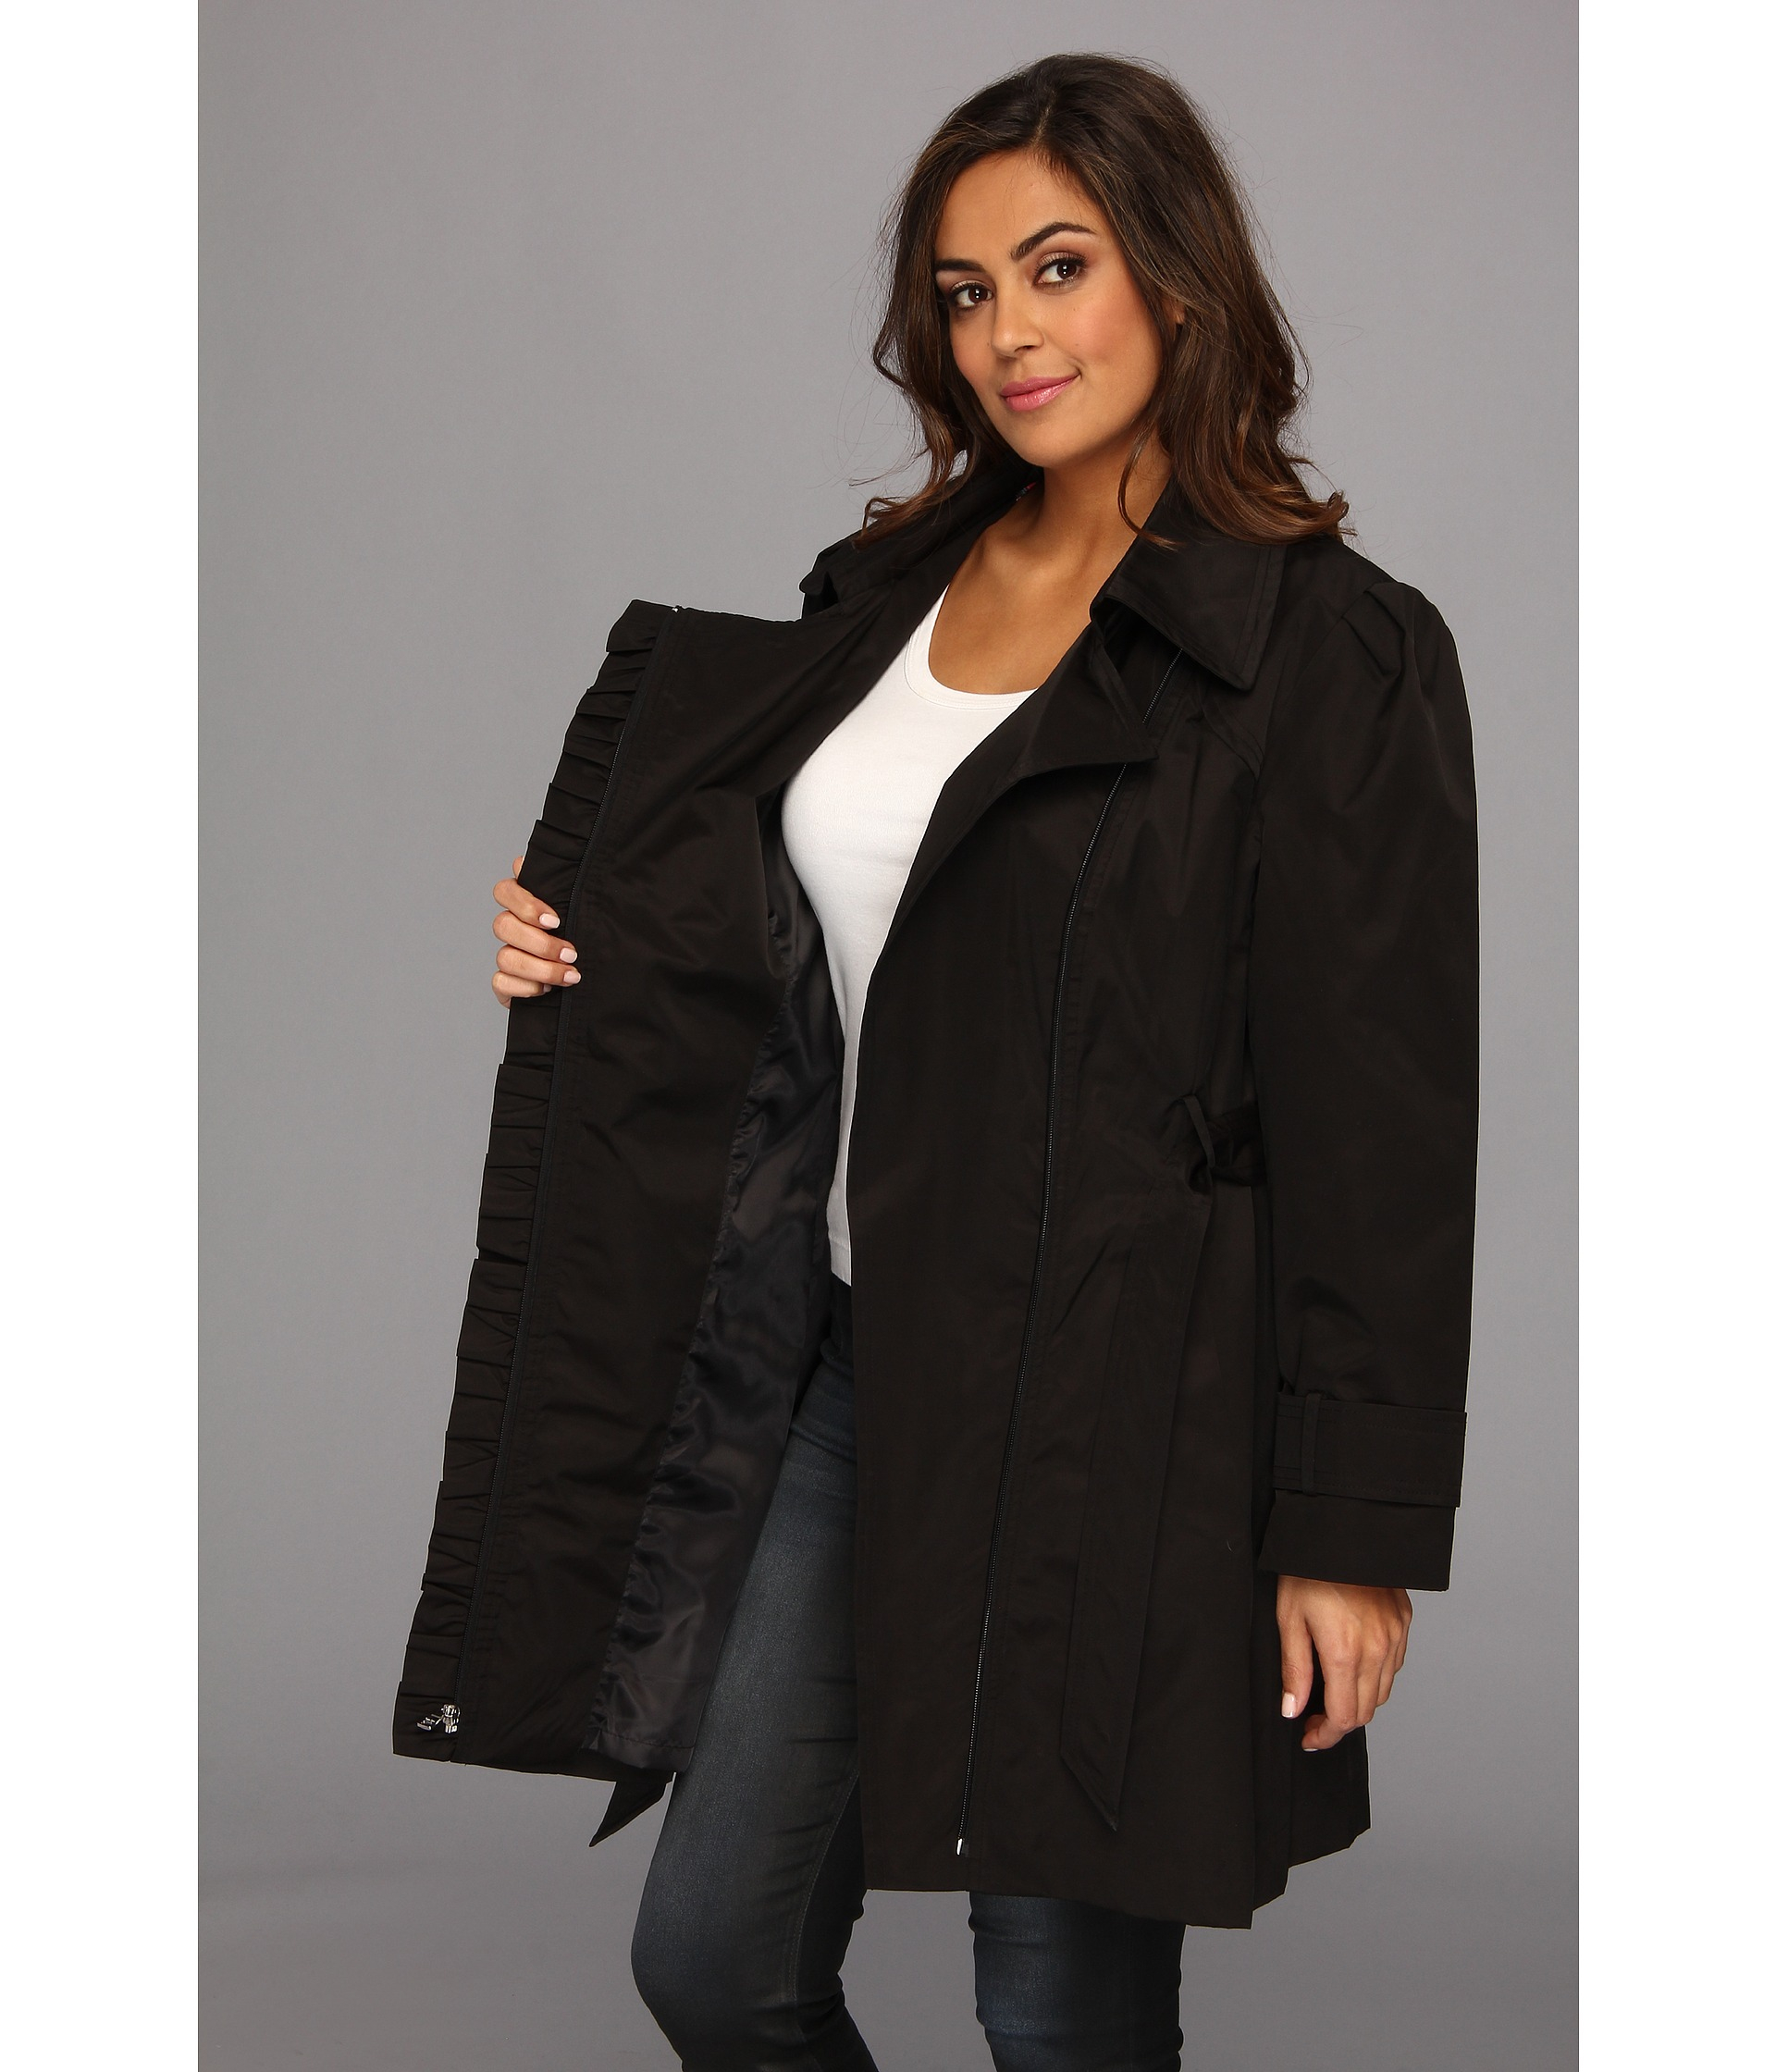 Lyst - Jessica Simpson Plus Size Ruffle Trim Belted Trench Coat in Black1920 x 2240